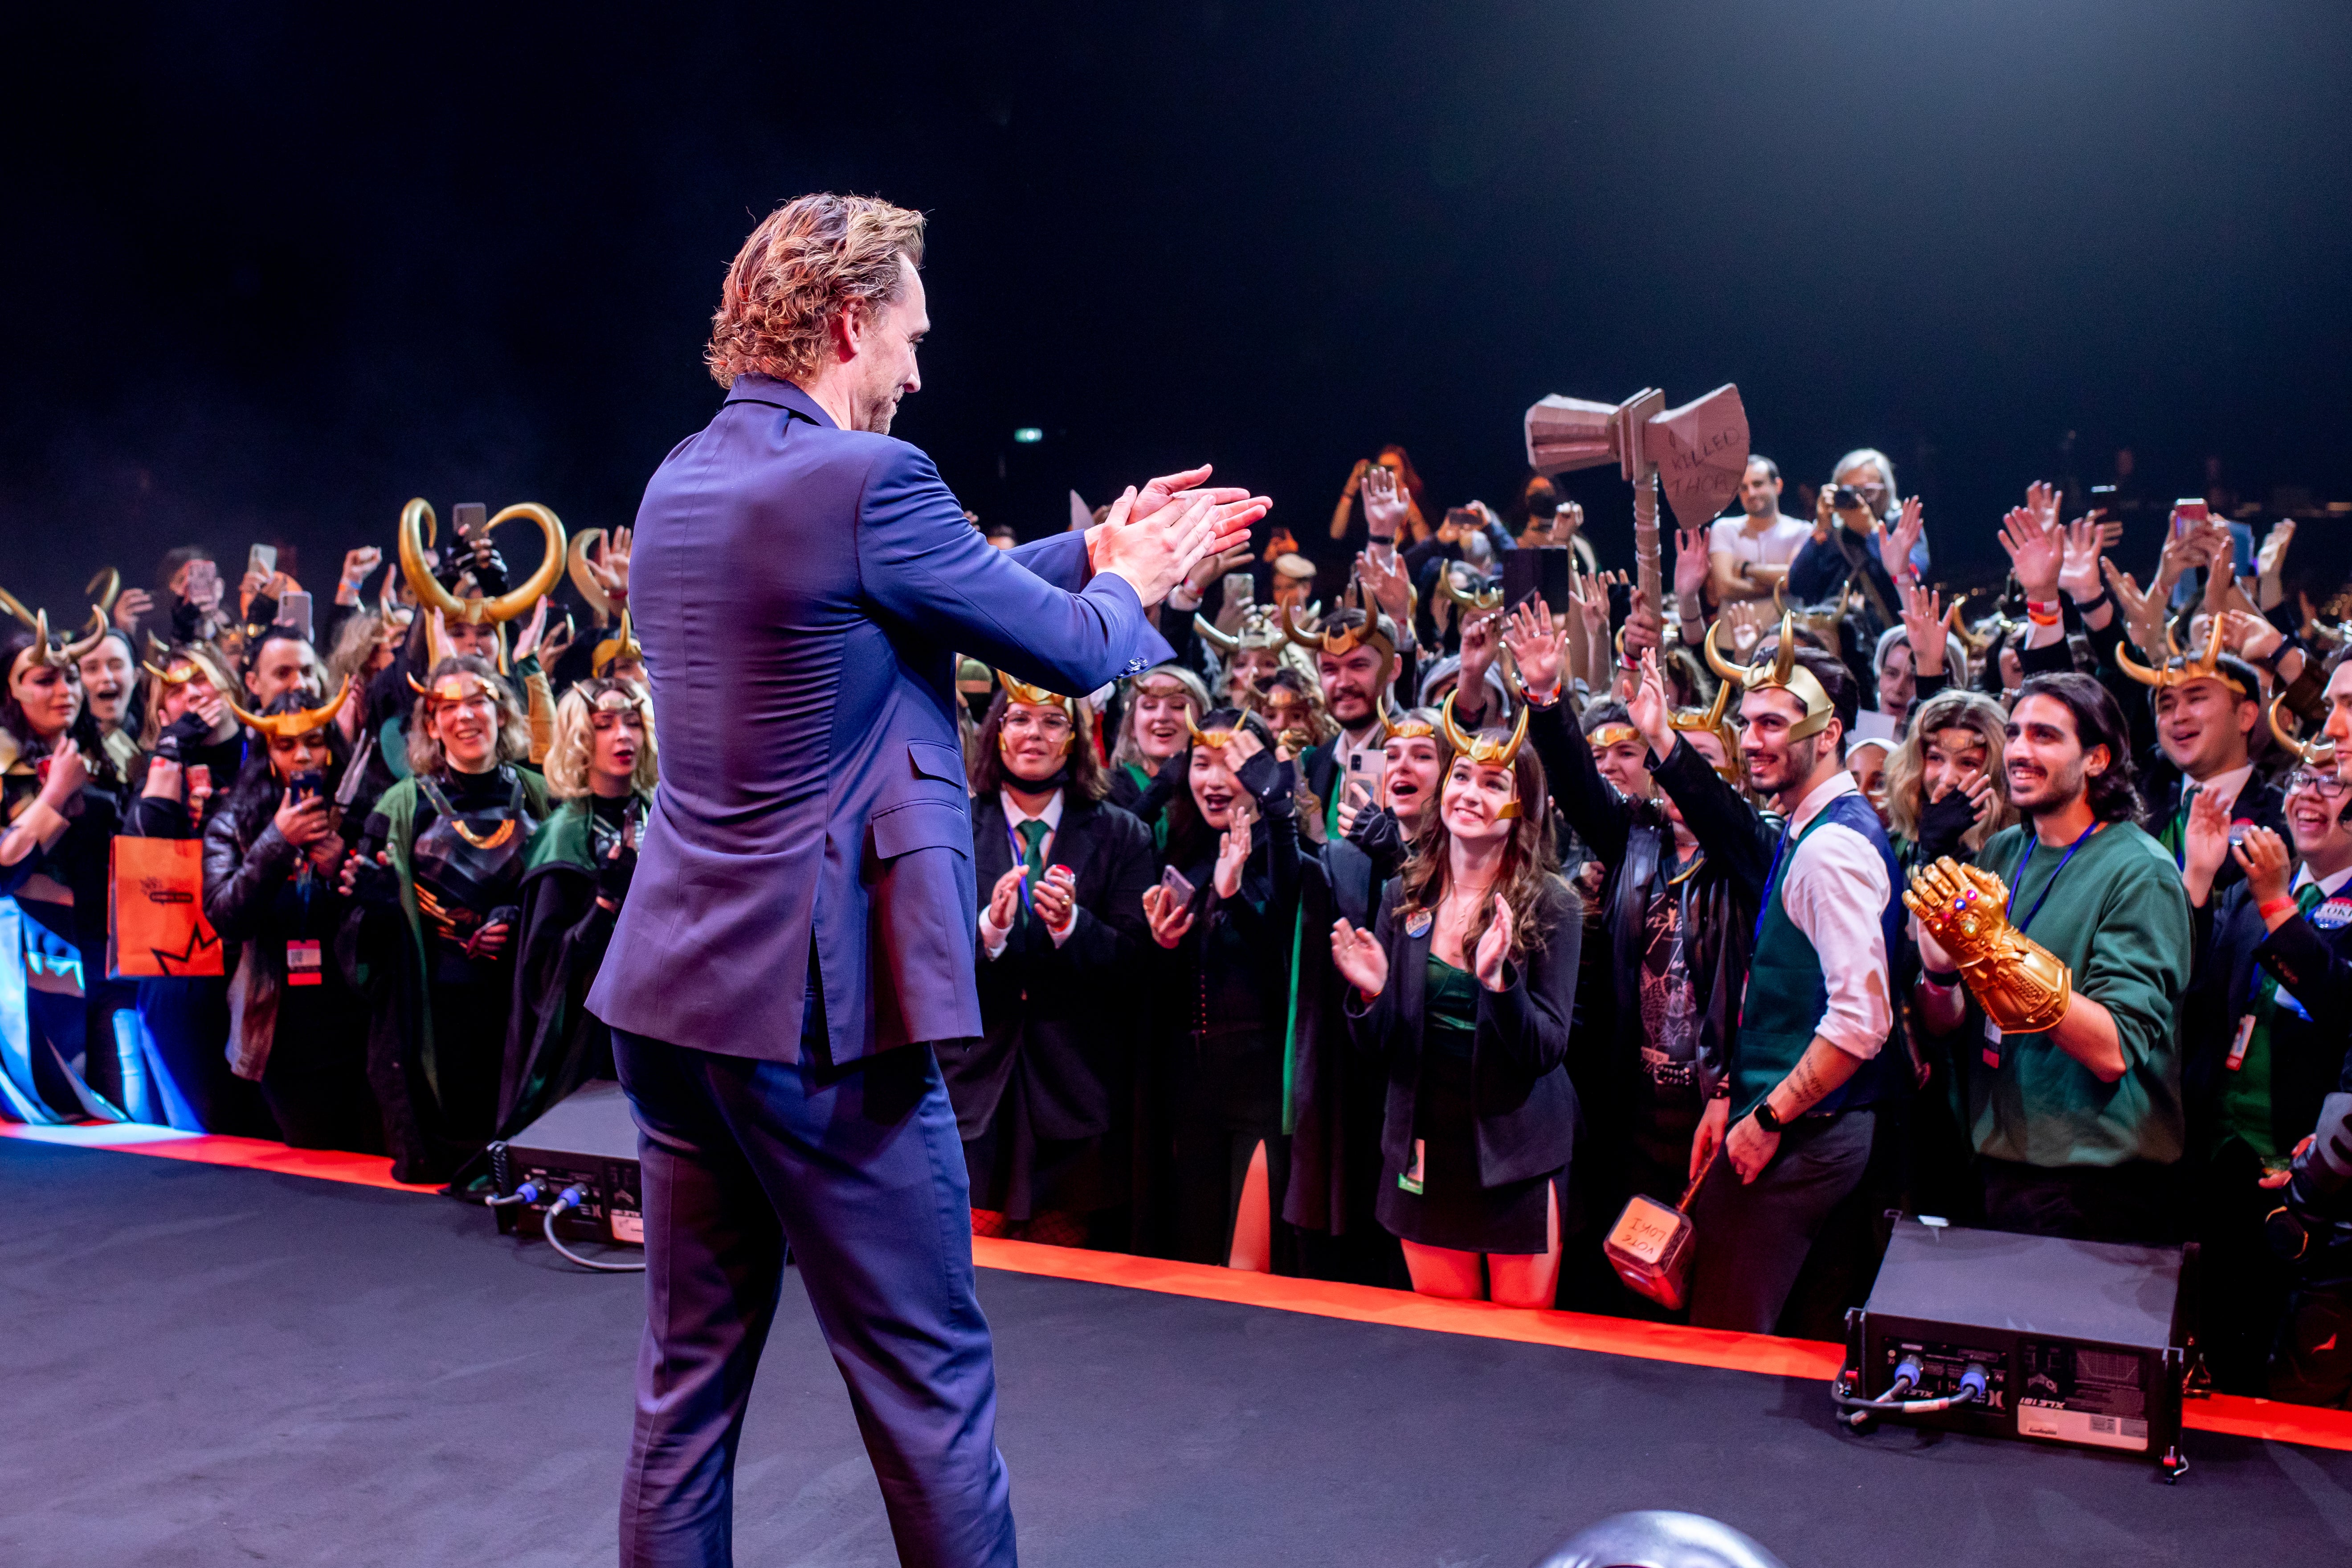 Tom surprises fans at MCM London (Image courtesy MCM London & Cosplay Central)